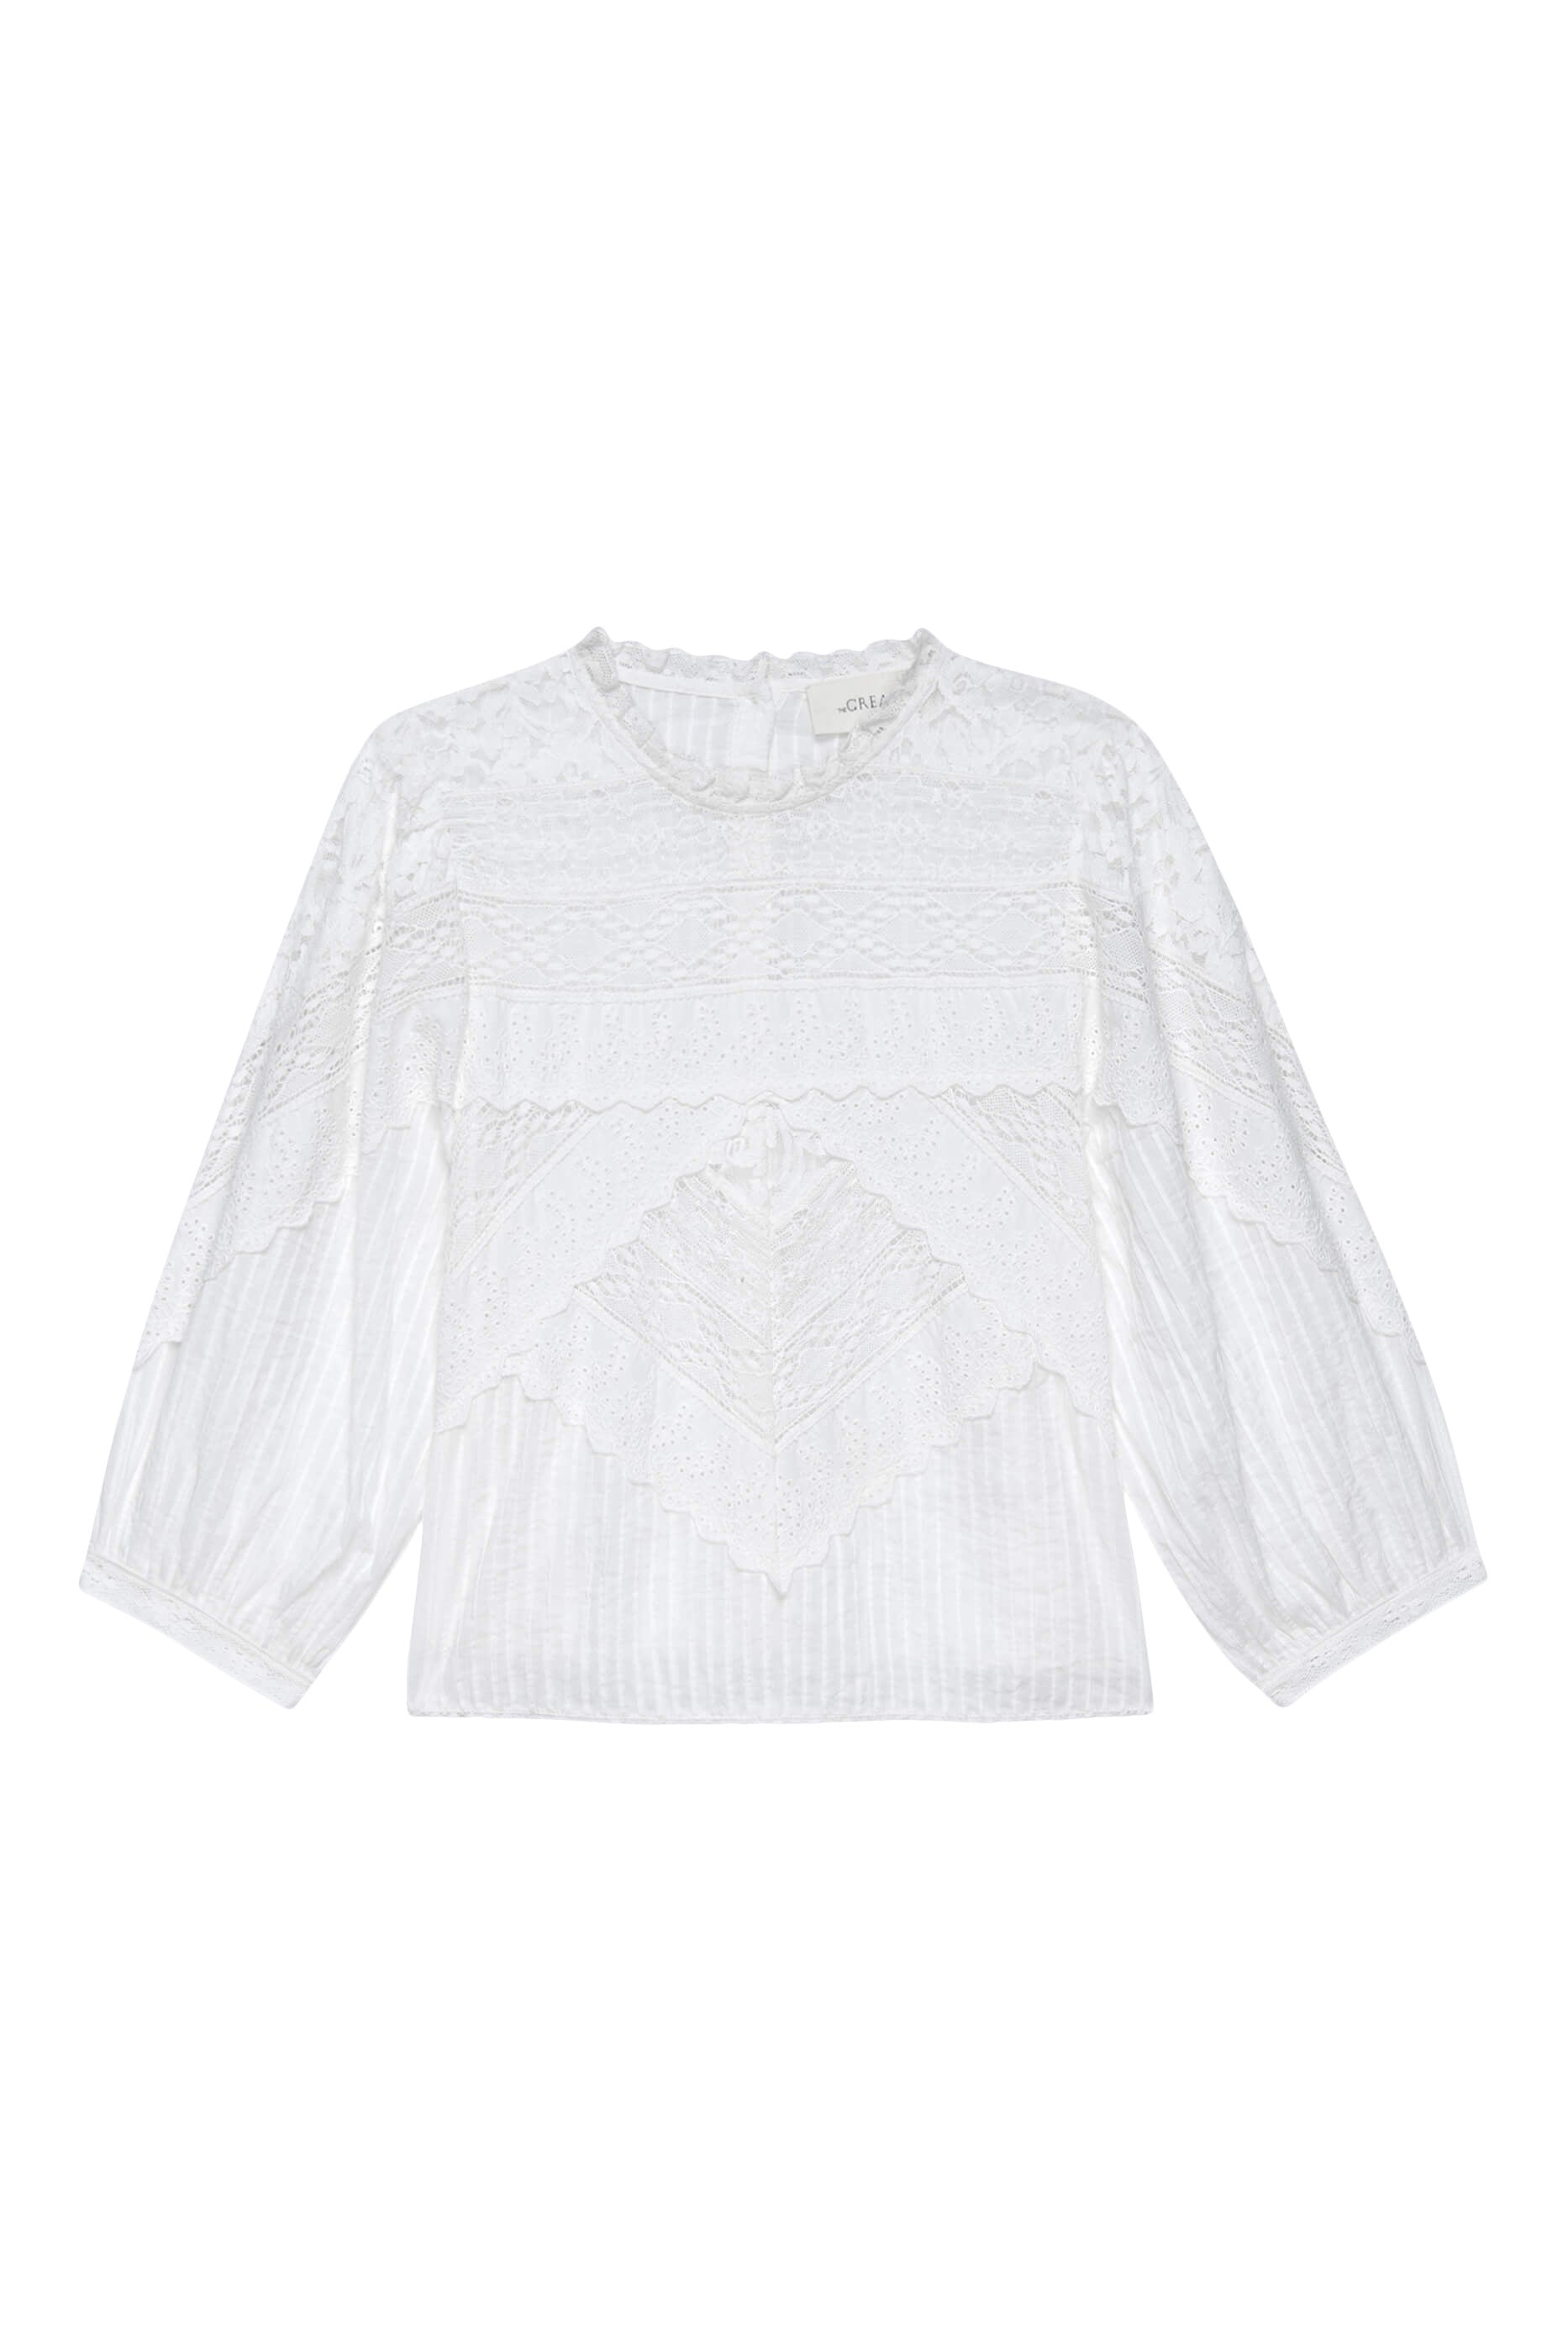 The Great Verona Top in White